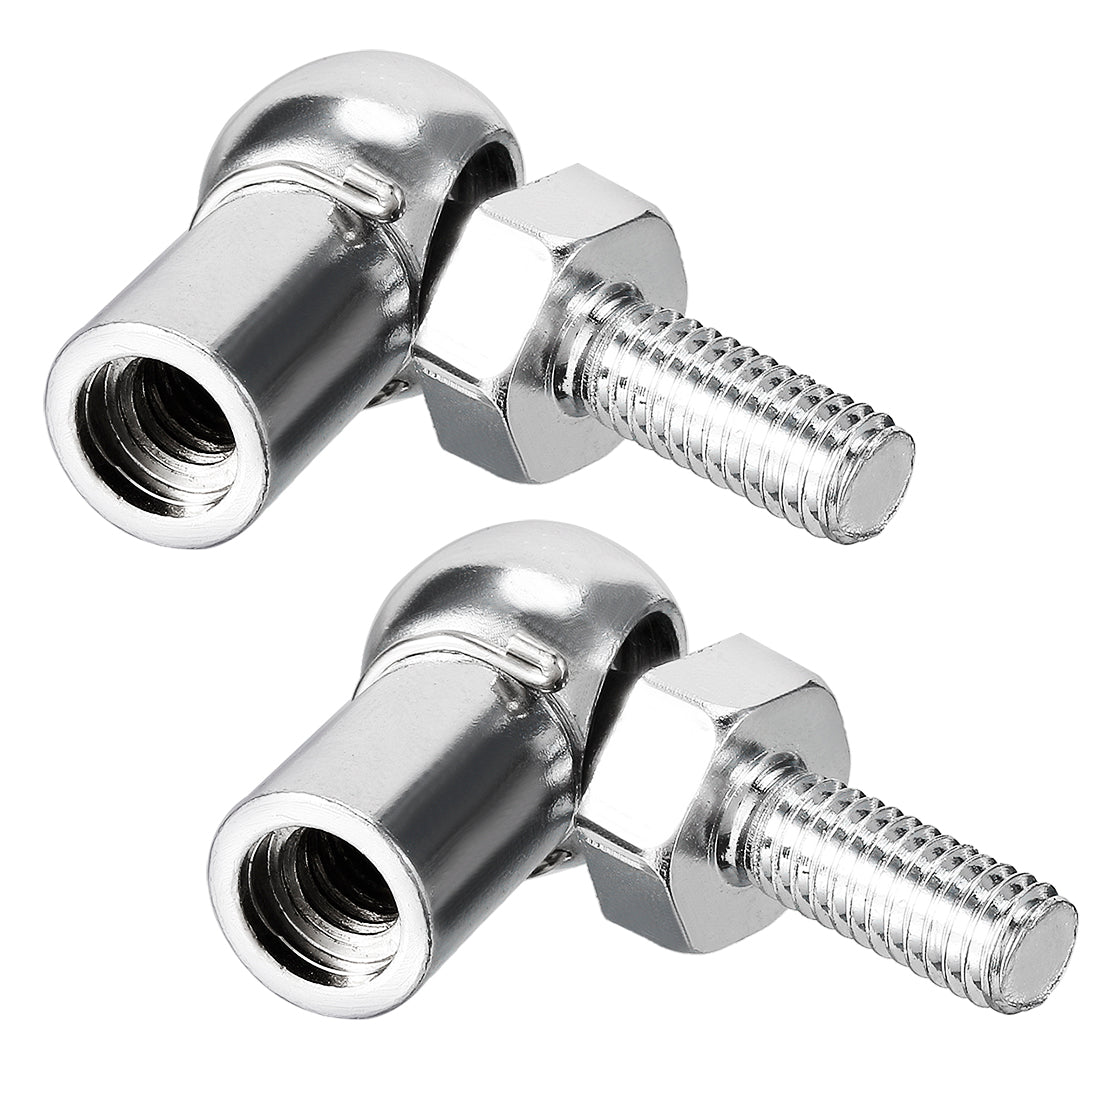 Uxcell Uxcell Gas Spring End Fitting M8 Female Thread 8mm Round Handle Dia A3 Steel 2pcs